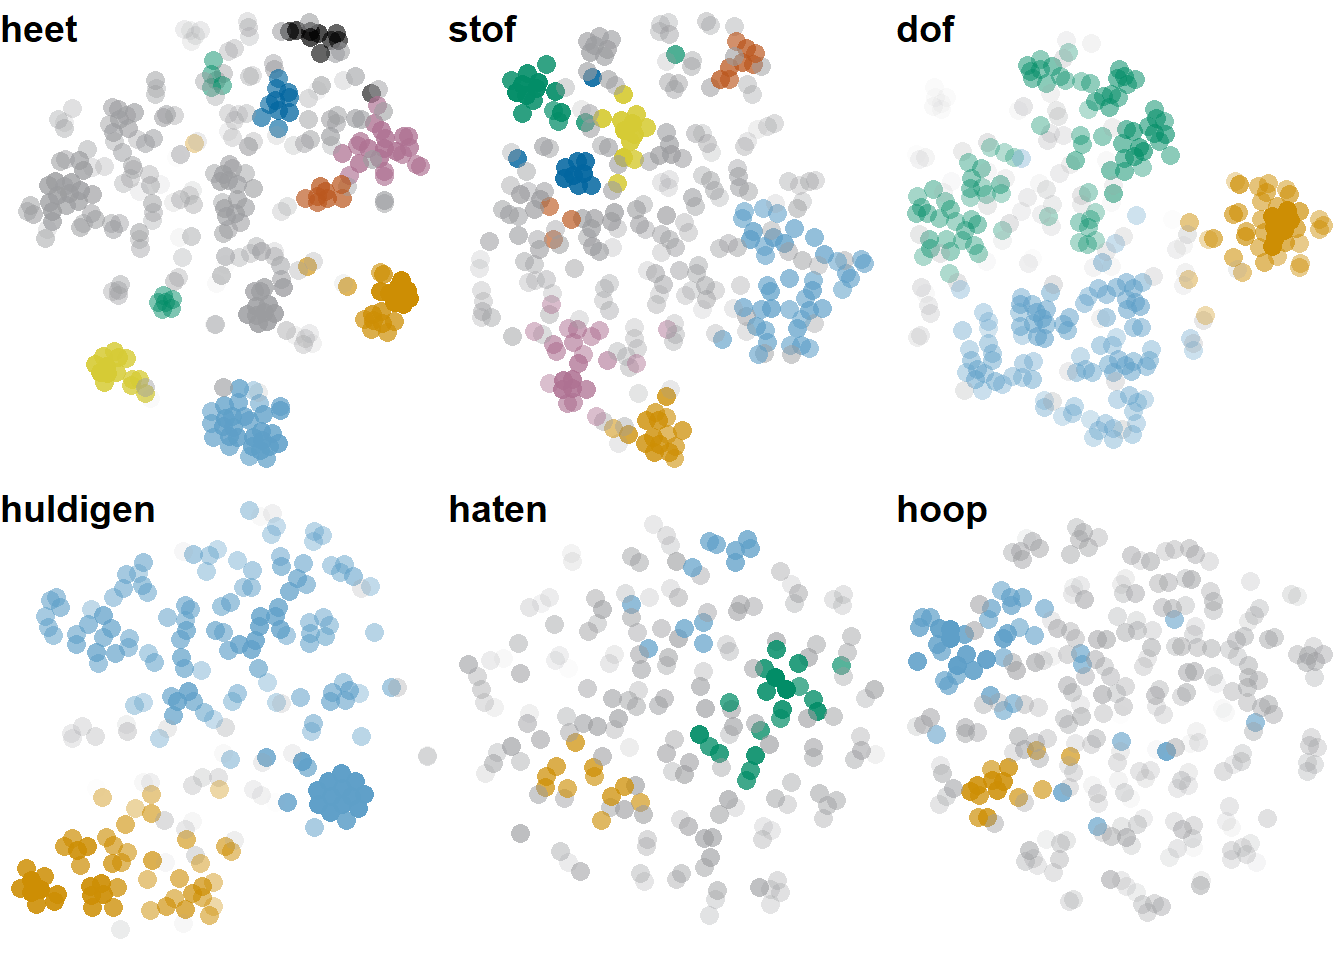 T-sne representations of the same parameter settings (bound5lex-ppmiselection-focall) across six different lemmas, coloured coded with hdbscan clustering. Some of the heet clusters are gray because there are more clusters than colours we can clearly distinguish.